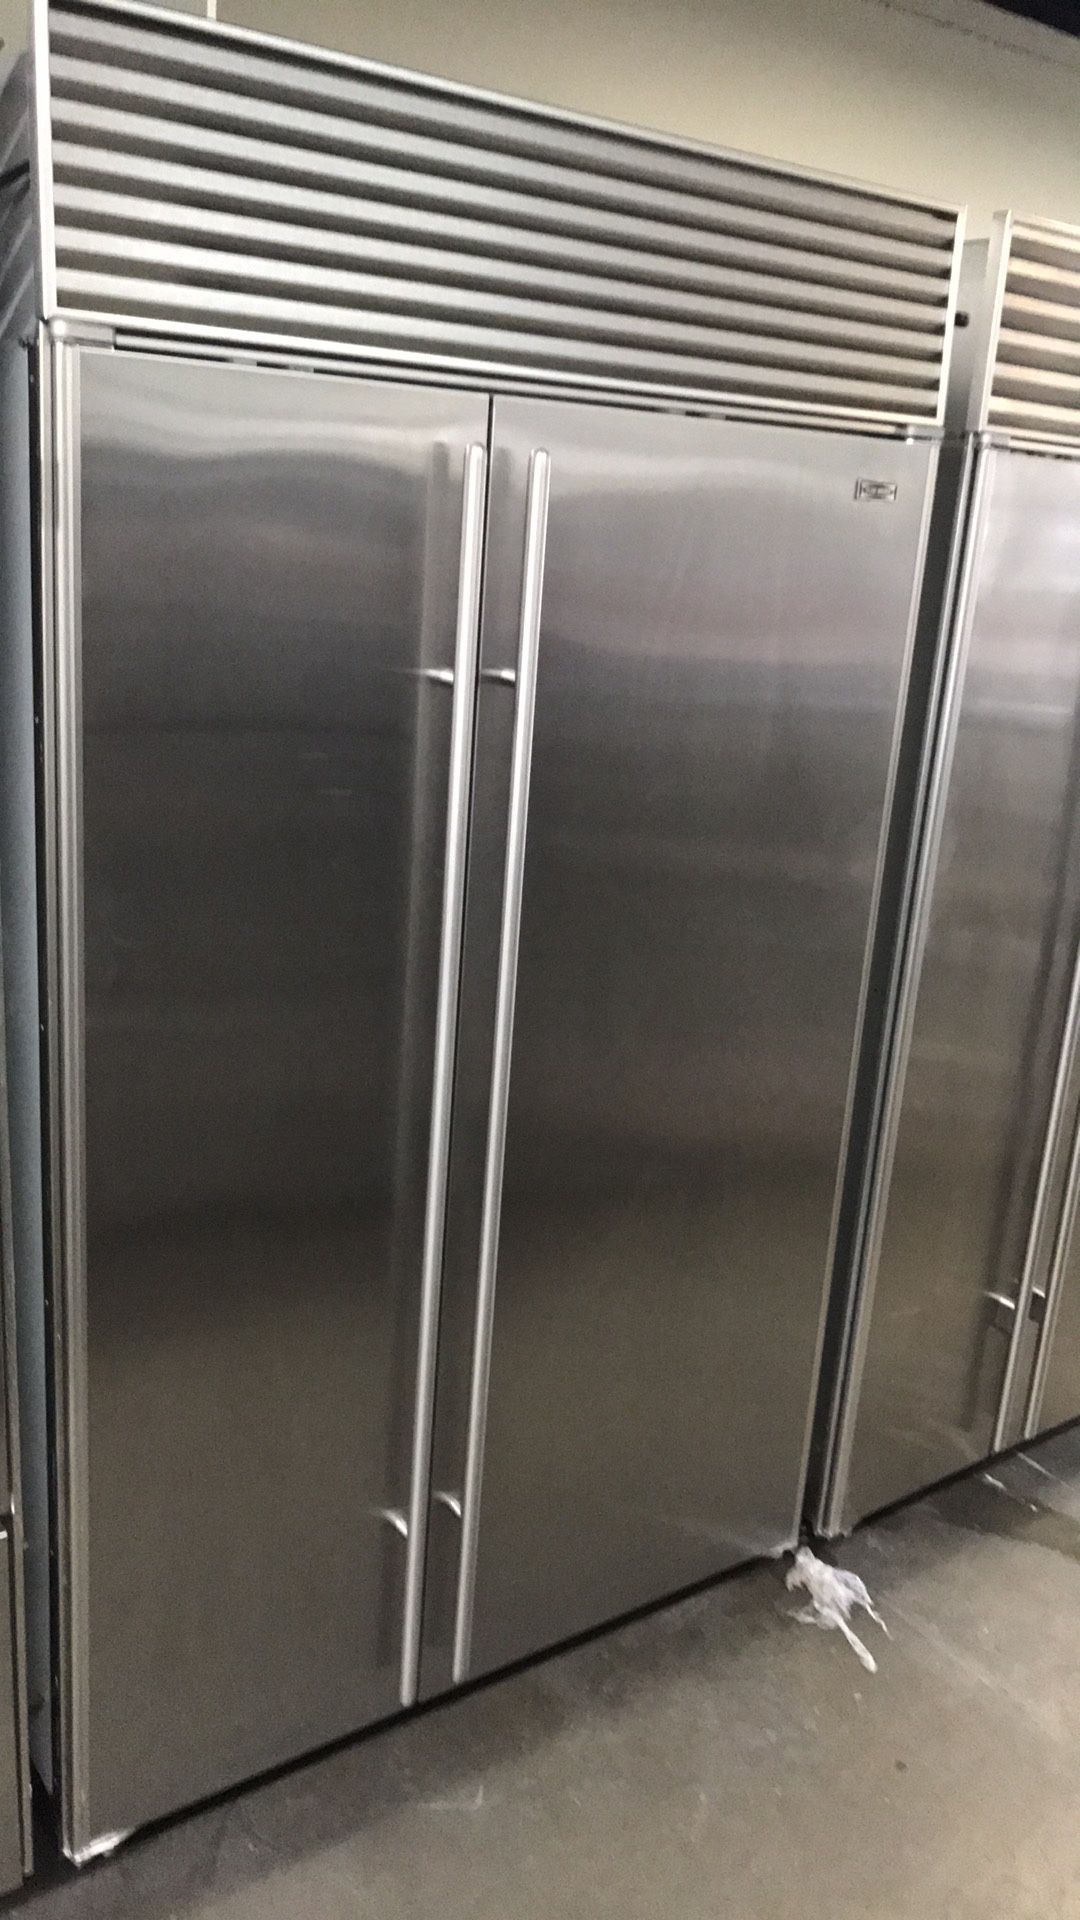 Sub Zero 48” Wide Stainless Steel Side By Side Built In Refrigerator 